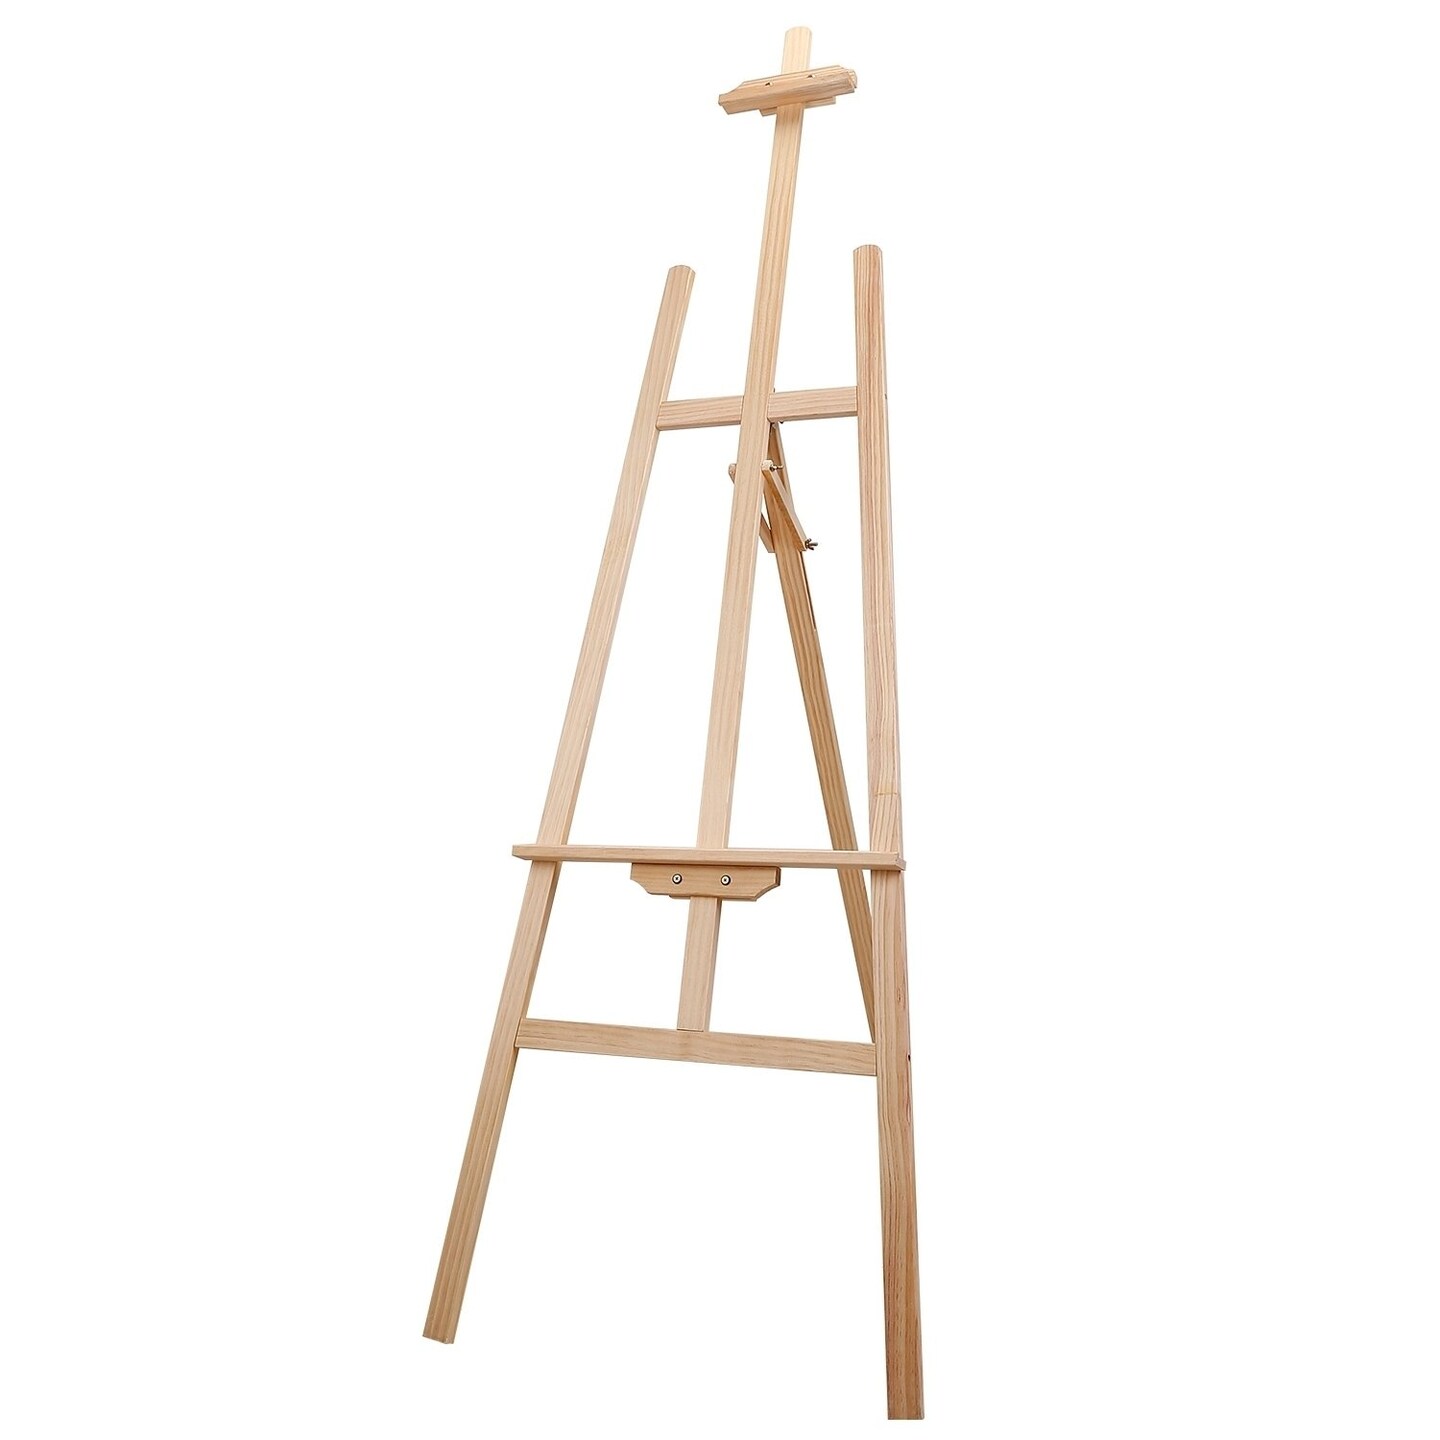 Global Phoenix Painting Easel Stand Wooden Inclinable A Frame Tripod Easel Drawing Stand with 63.4 in-68.9in Adjustable Height Hold